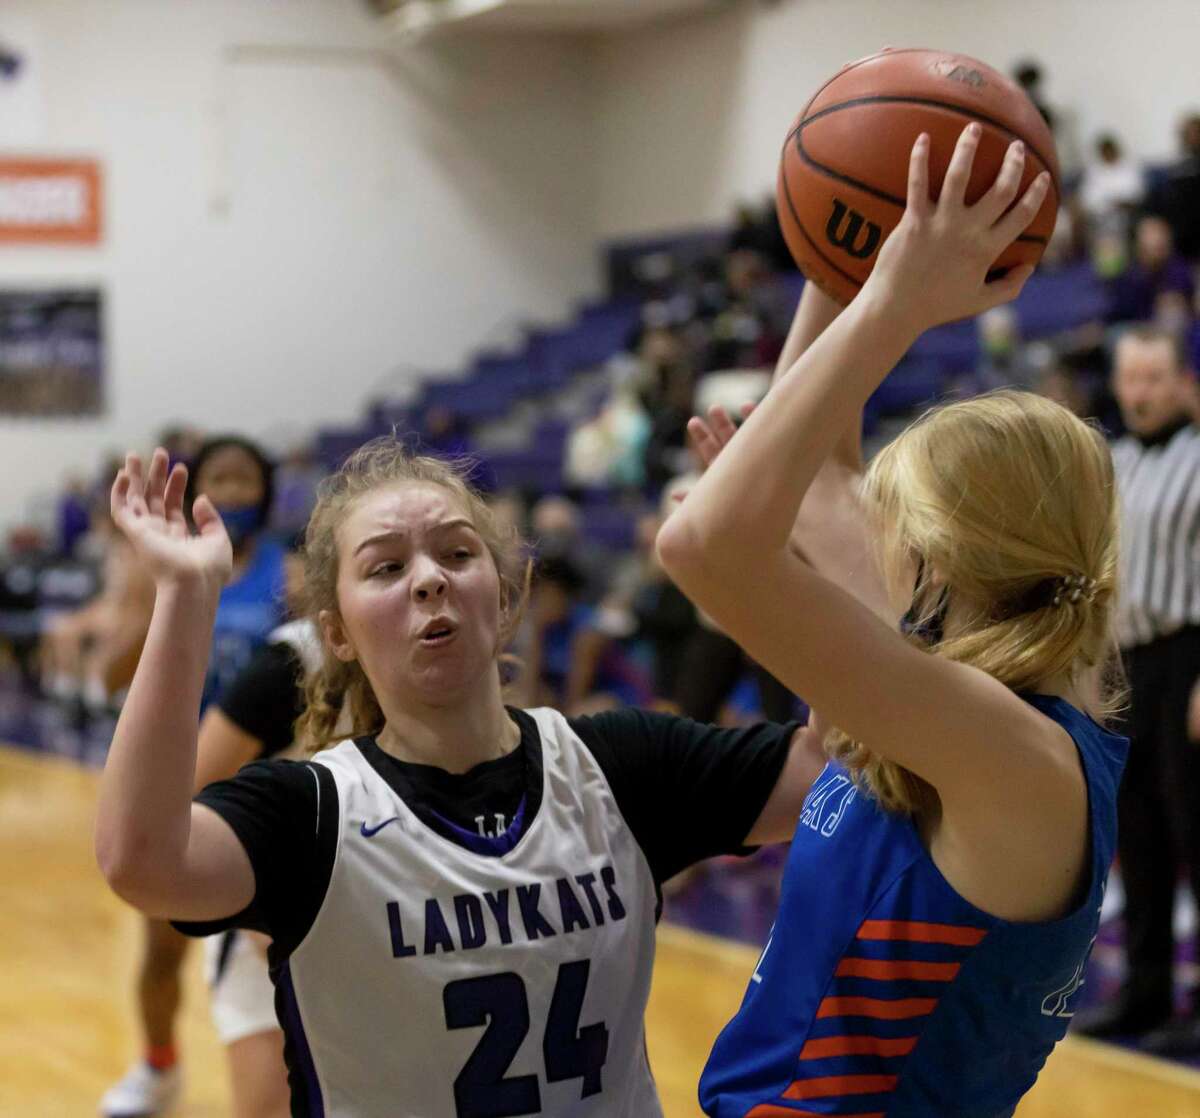 Willis guard Kylie Santore (24) attempts to block Grand Oaks small forward Kylee Myers (12) from passing the ball during the third quarter of a District 13-6A girls basketball game at Willis High School, Saturday, Jan. 2, 2020, in Willis.